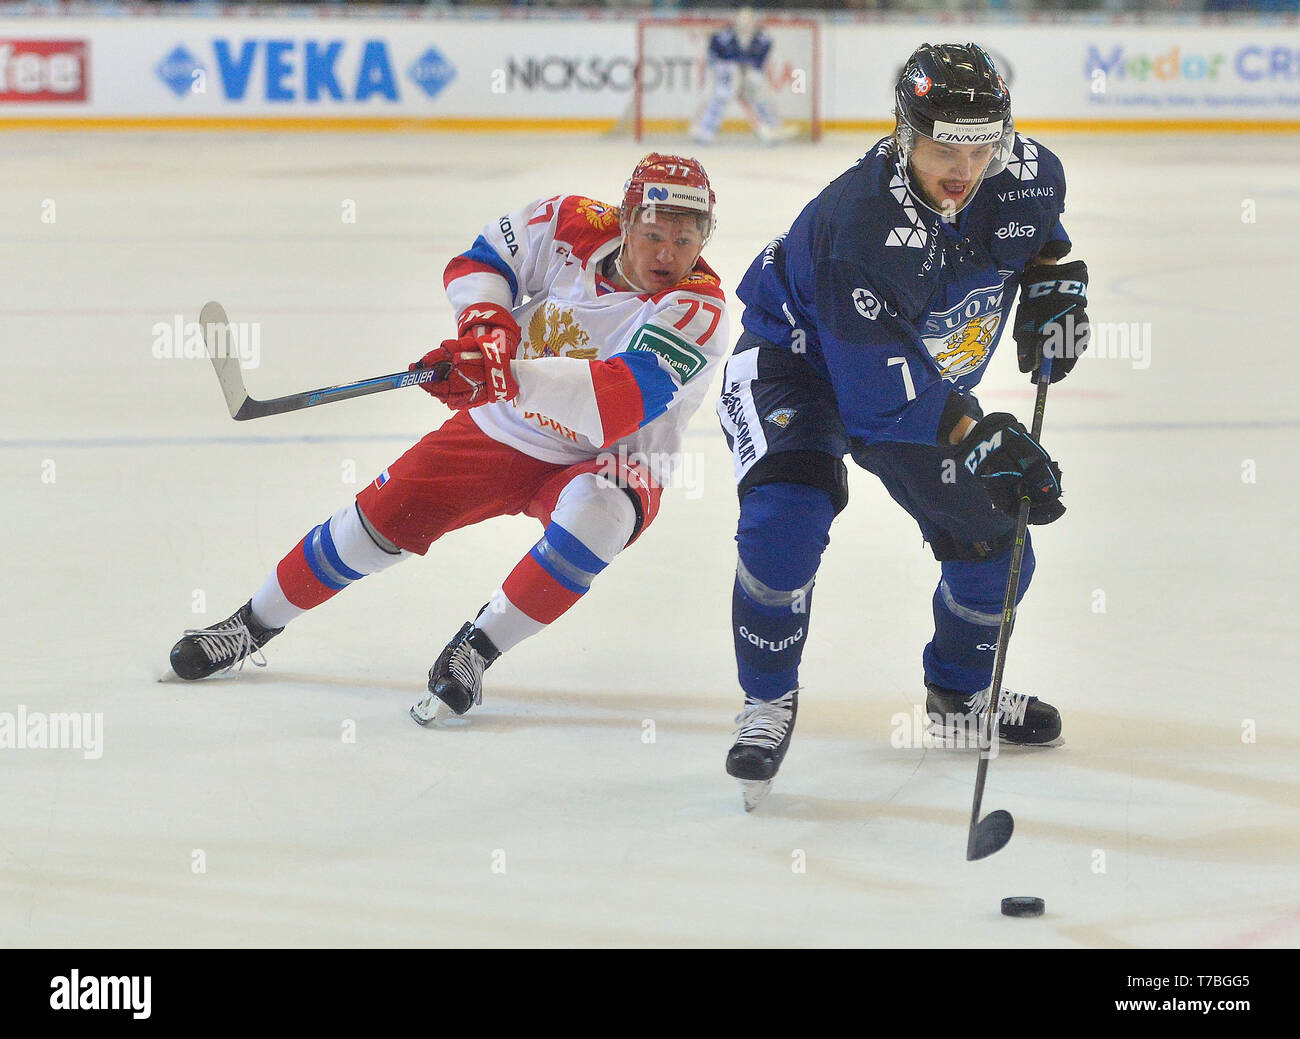 Brno, Czech Republic. 04th May, 2019. L-R Kirill Kaprizov (RUS) and Oliwer Kaski (FIN) in action during the Russia vs Finland match within Carlson Hockey Games tournament, part of Euro Hockey Tour in Brno, Czech Republic, May 5, 2019. Credit: Lubos Pavlicek/CTK Photo/Alamy Live News Stock Photo